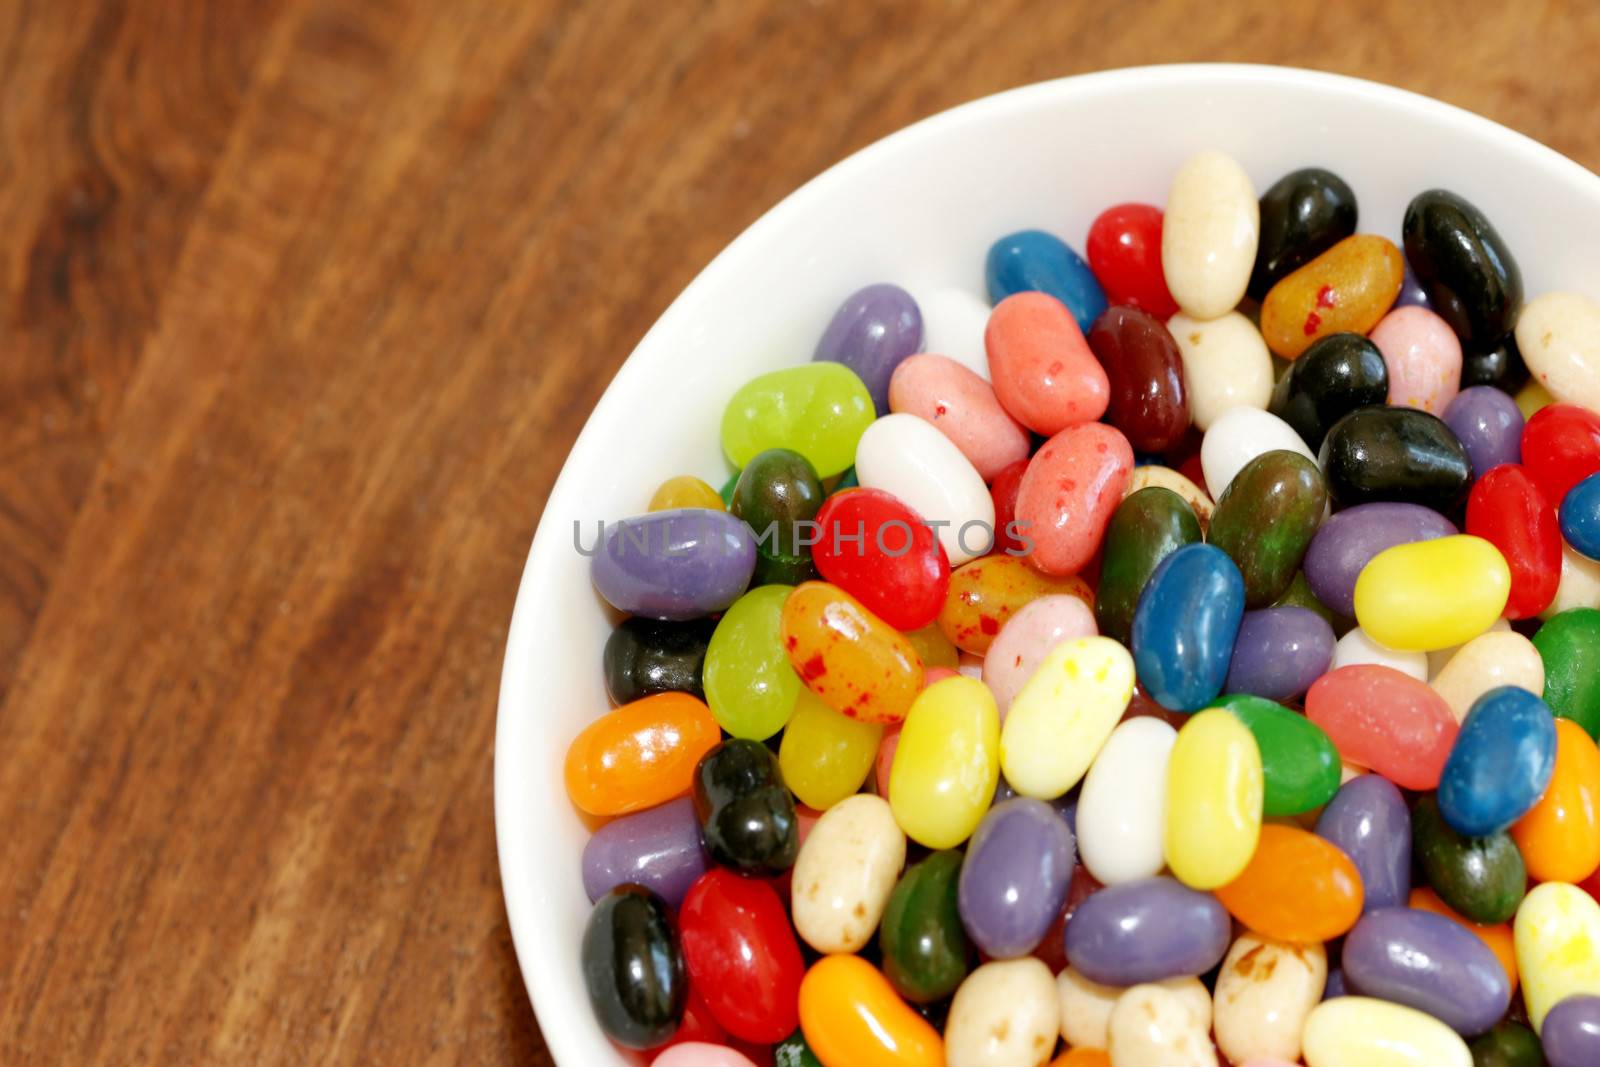 Bowl of Jelly Beans by Whiteboxmedia